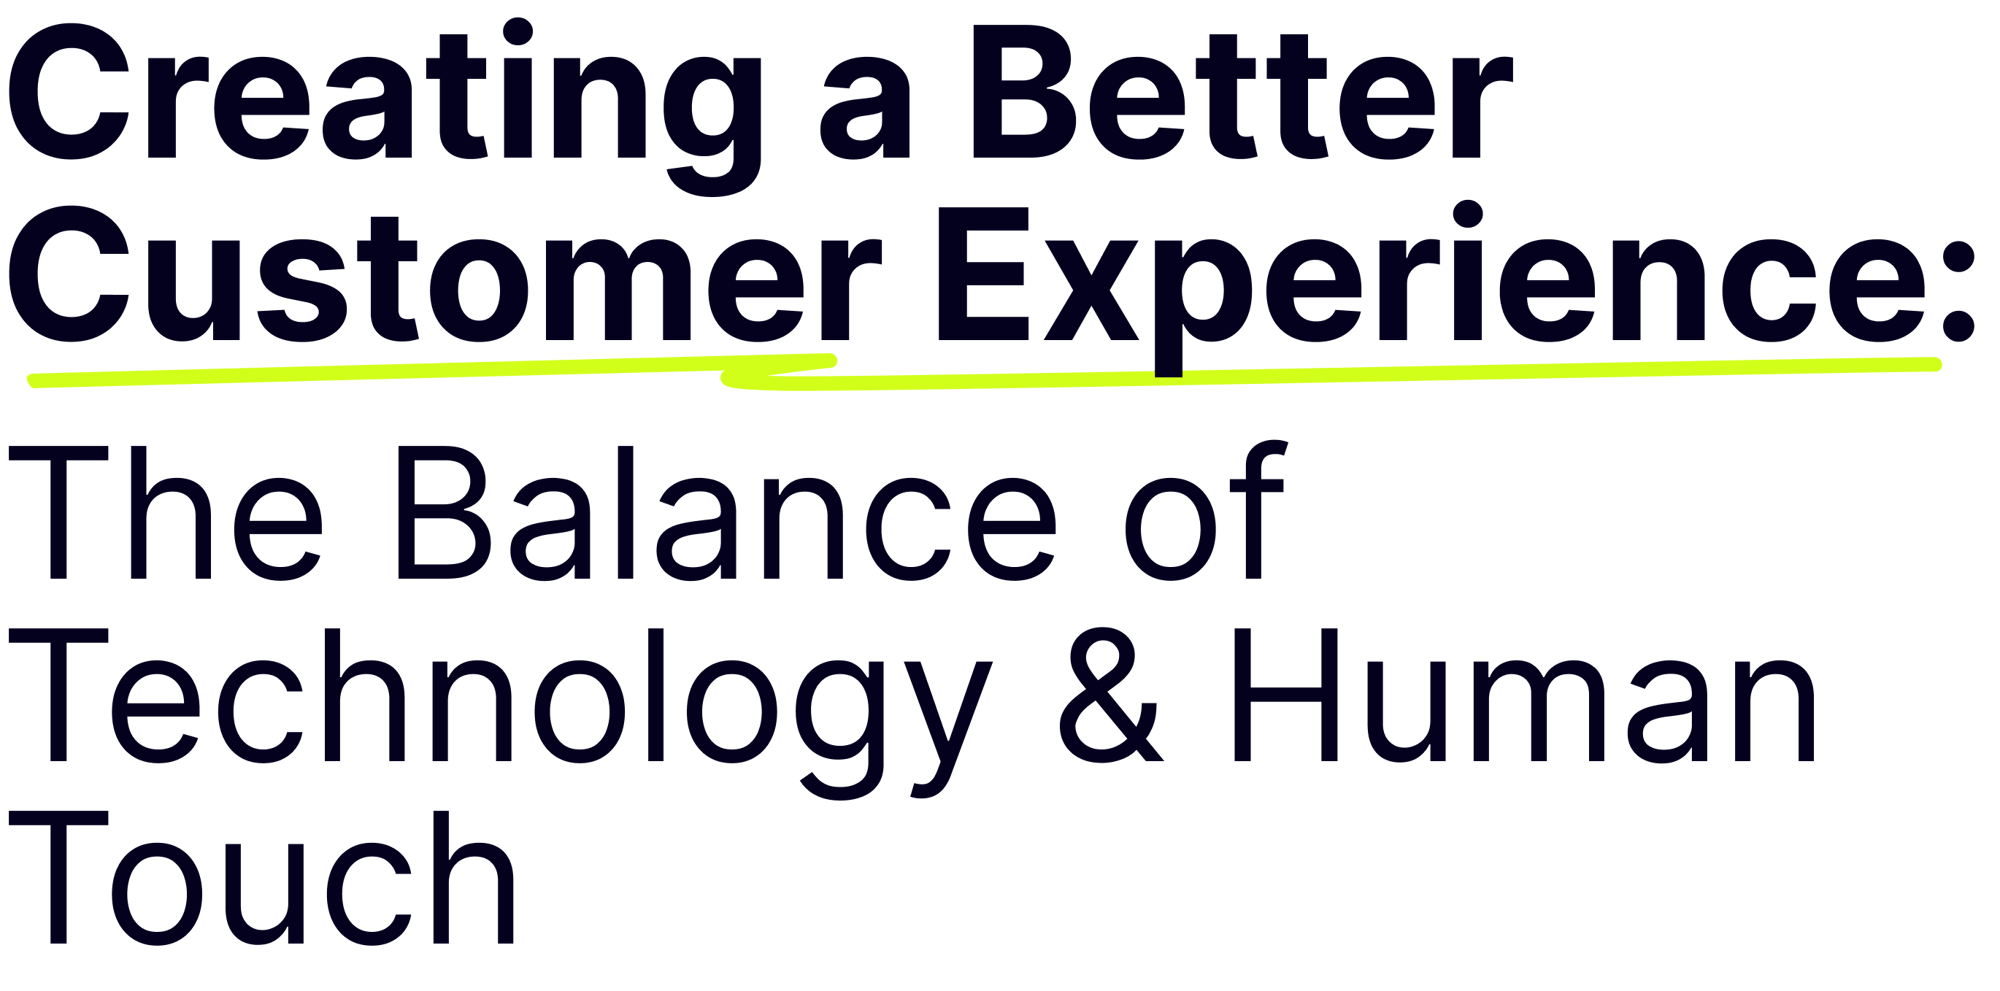 Creating a Better Customer Experience